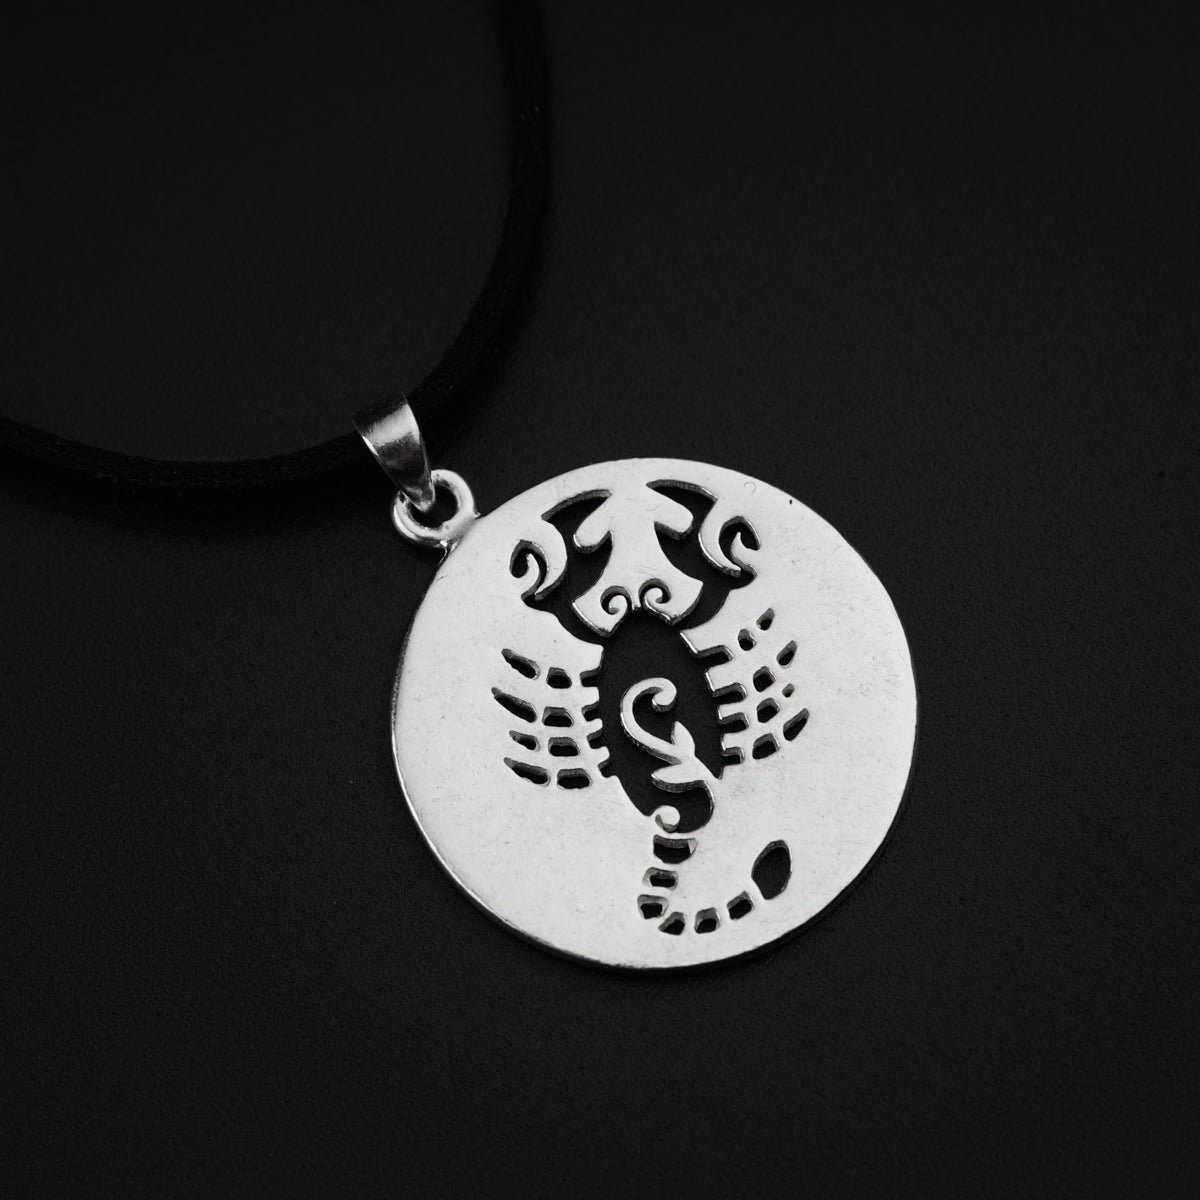 a silver pendant with a scorpion on it